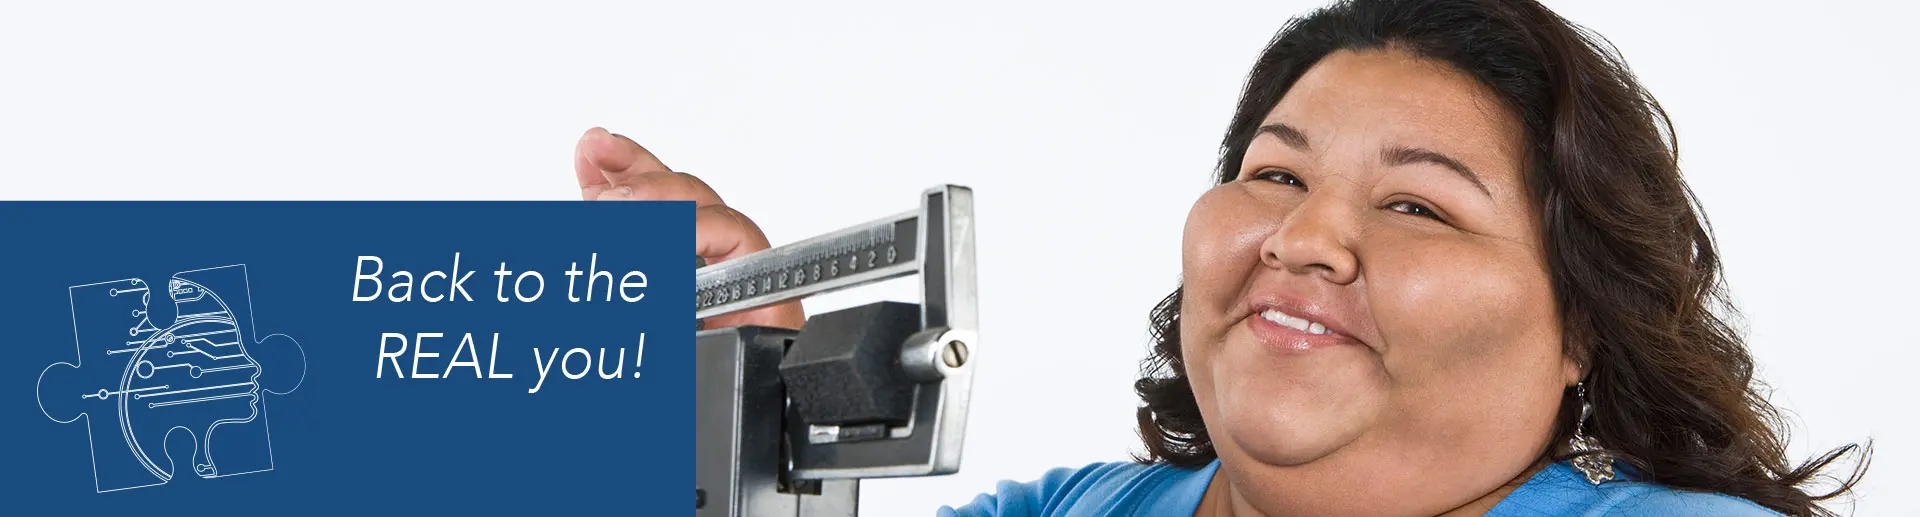 WOMEN SMILING ON WEIGHING SCALES